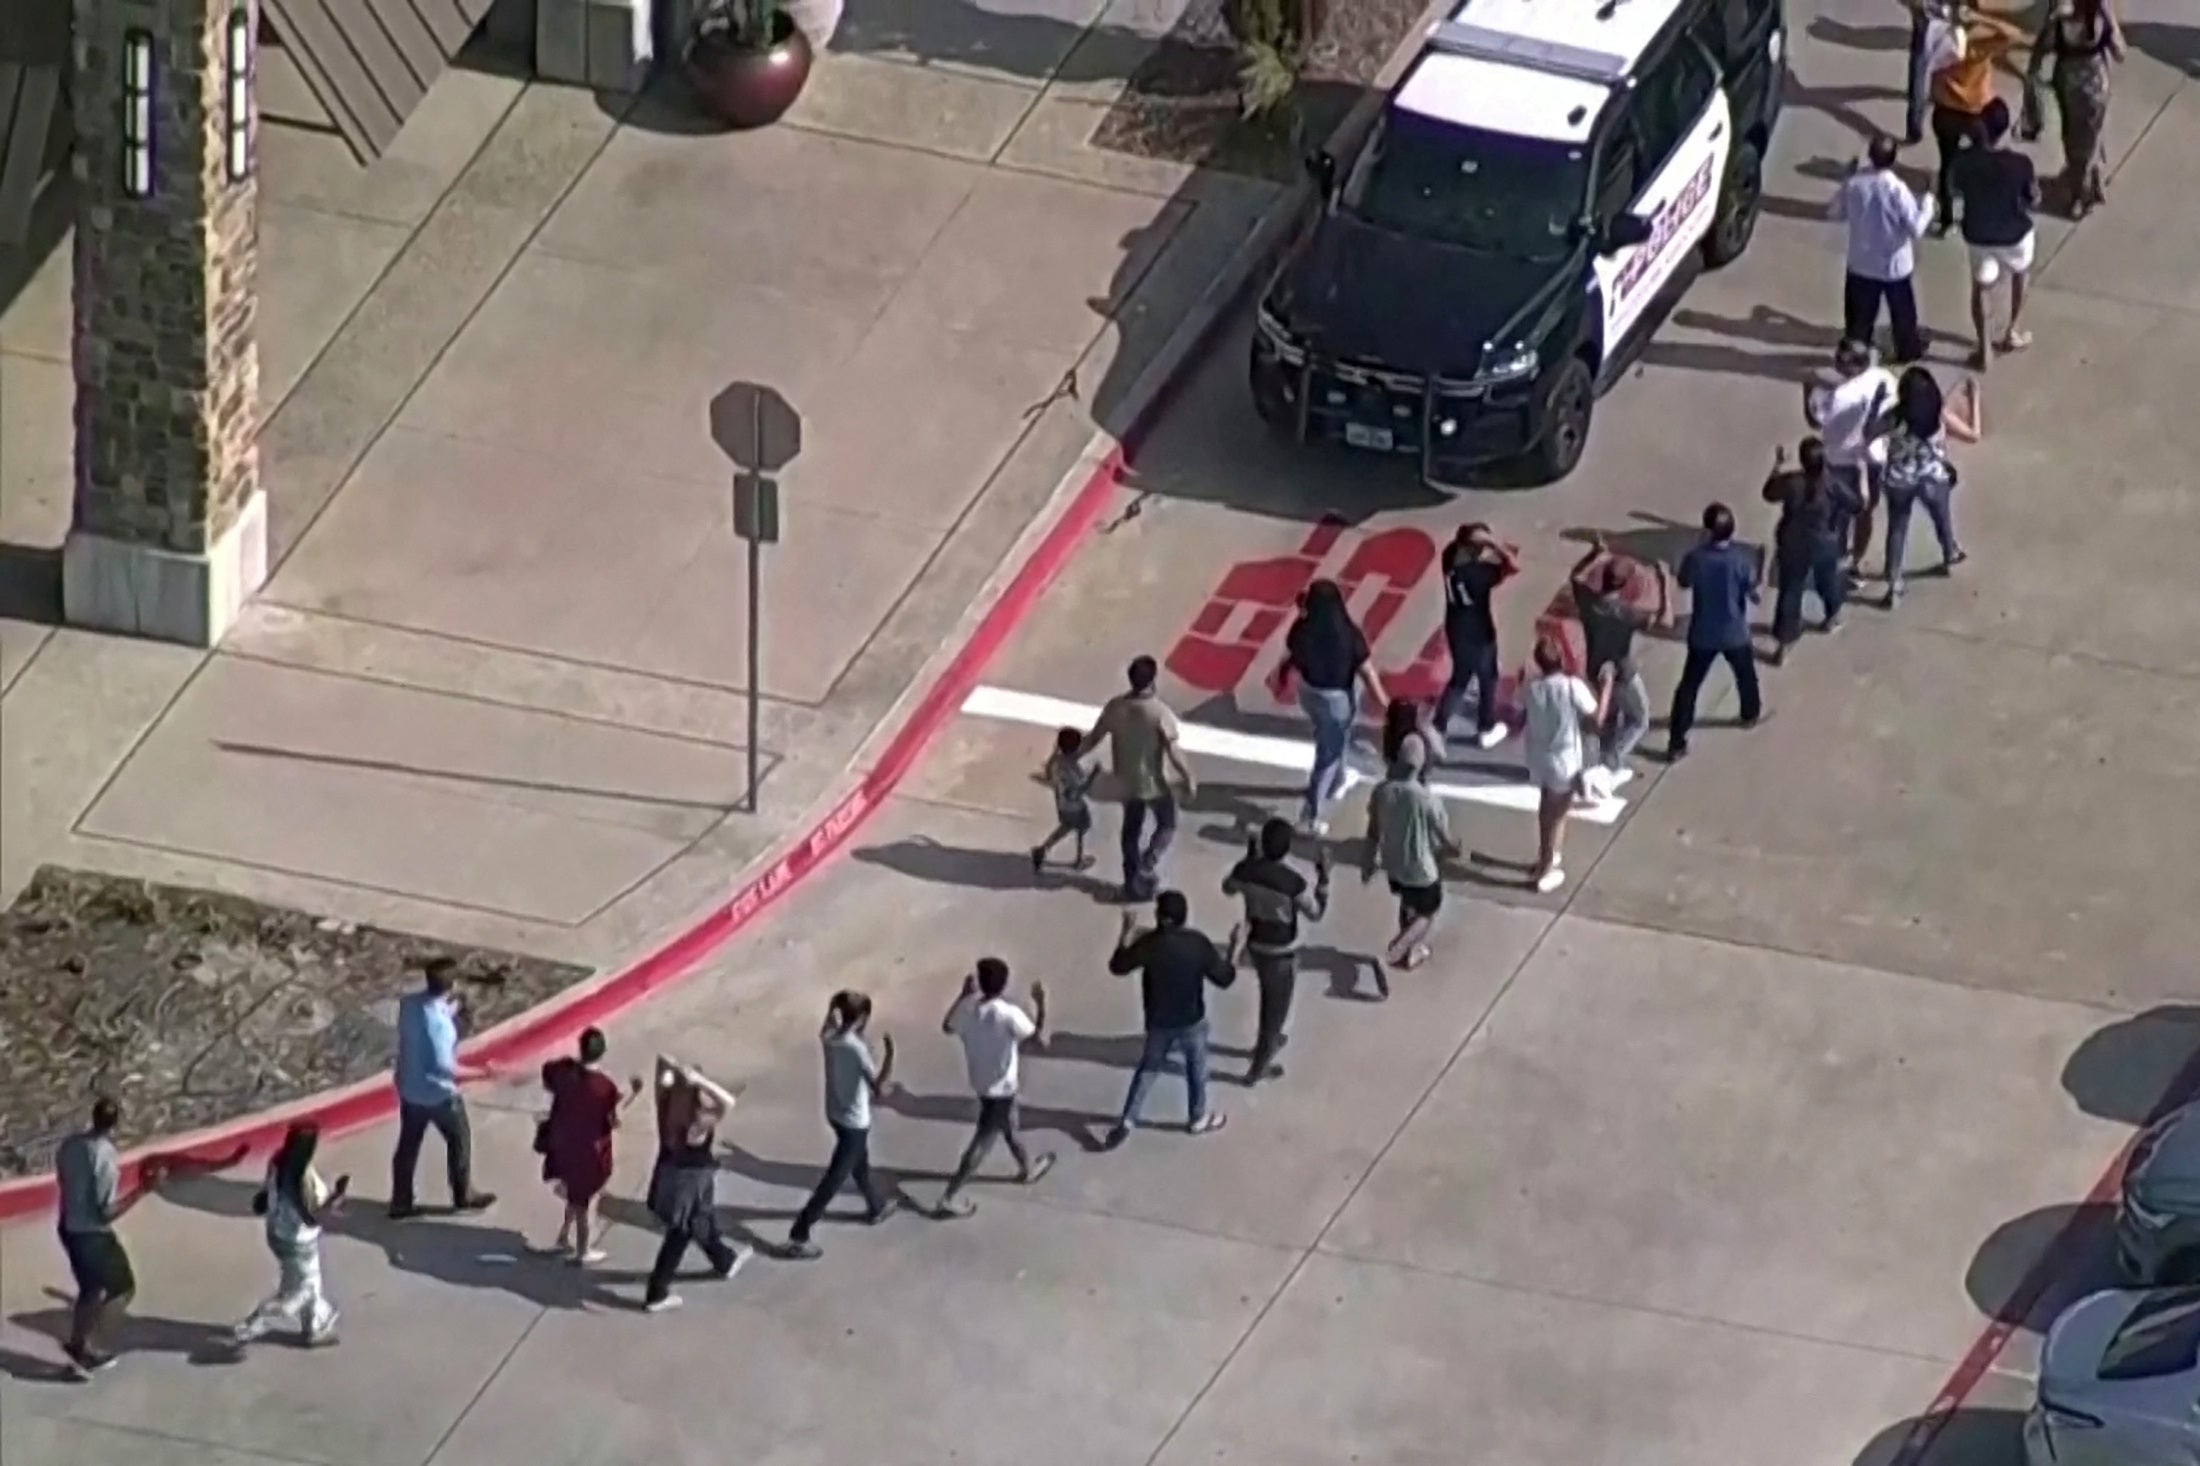 Survivors of the Allen mall mass shooting are escorted away from the scene by police officers.